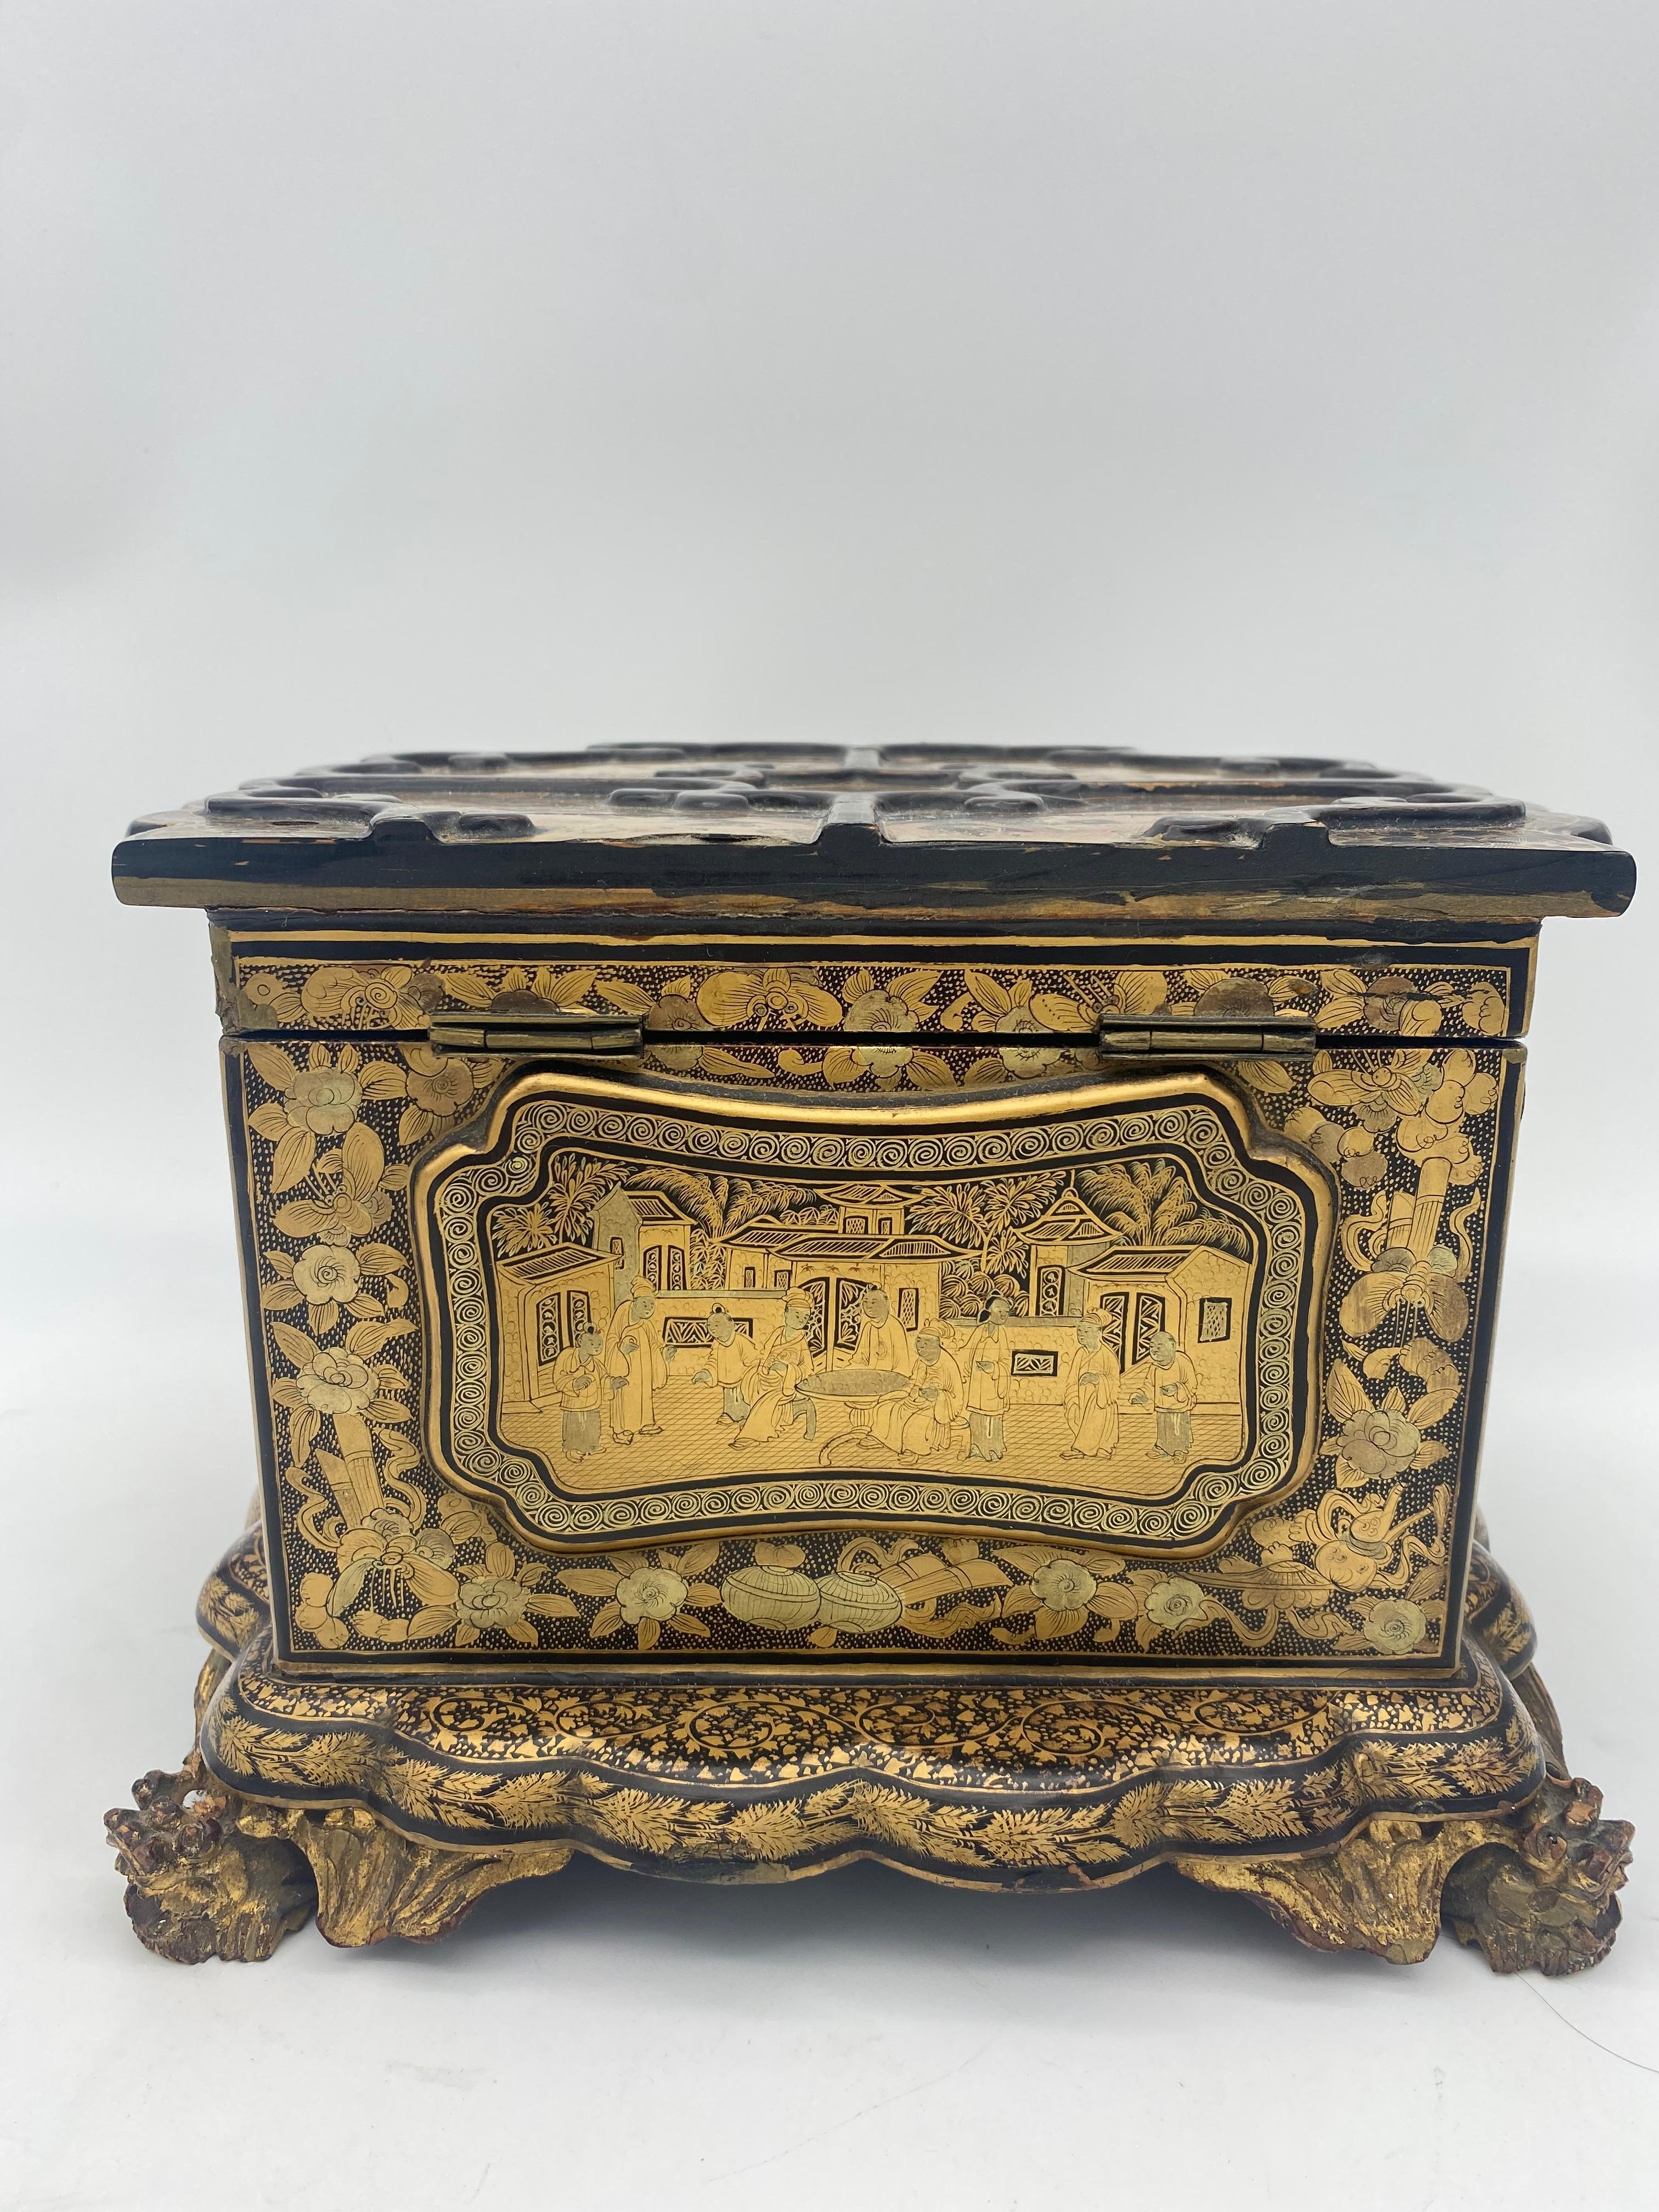 Unique 19th Century  Export Chinese Gilt Chinoiserie Lacquer Box For Sale 5